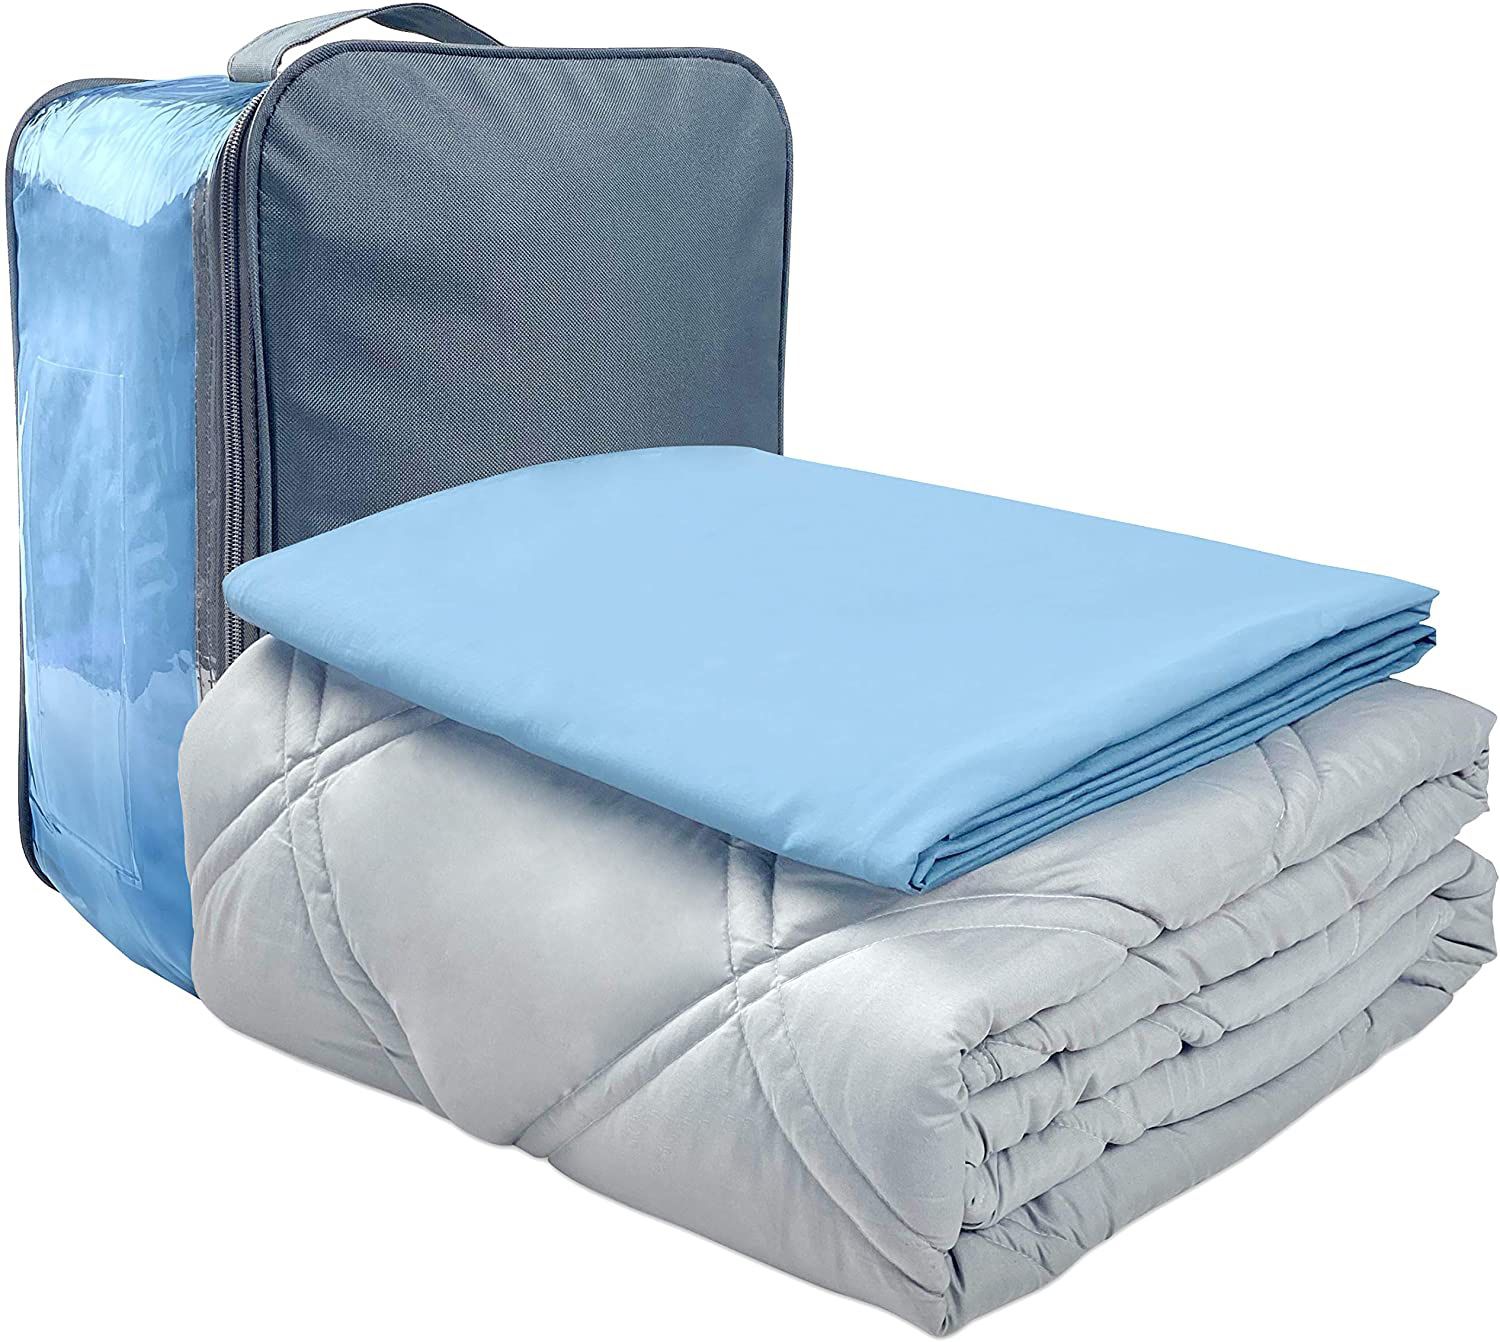 "Adult Weighted Blanket Queen Size with Cover (59""x81"" 23lbs)| Soft Premium Glass Beads Heavy Blanket (Blue)"